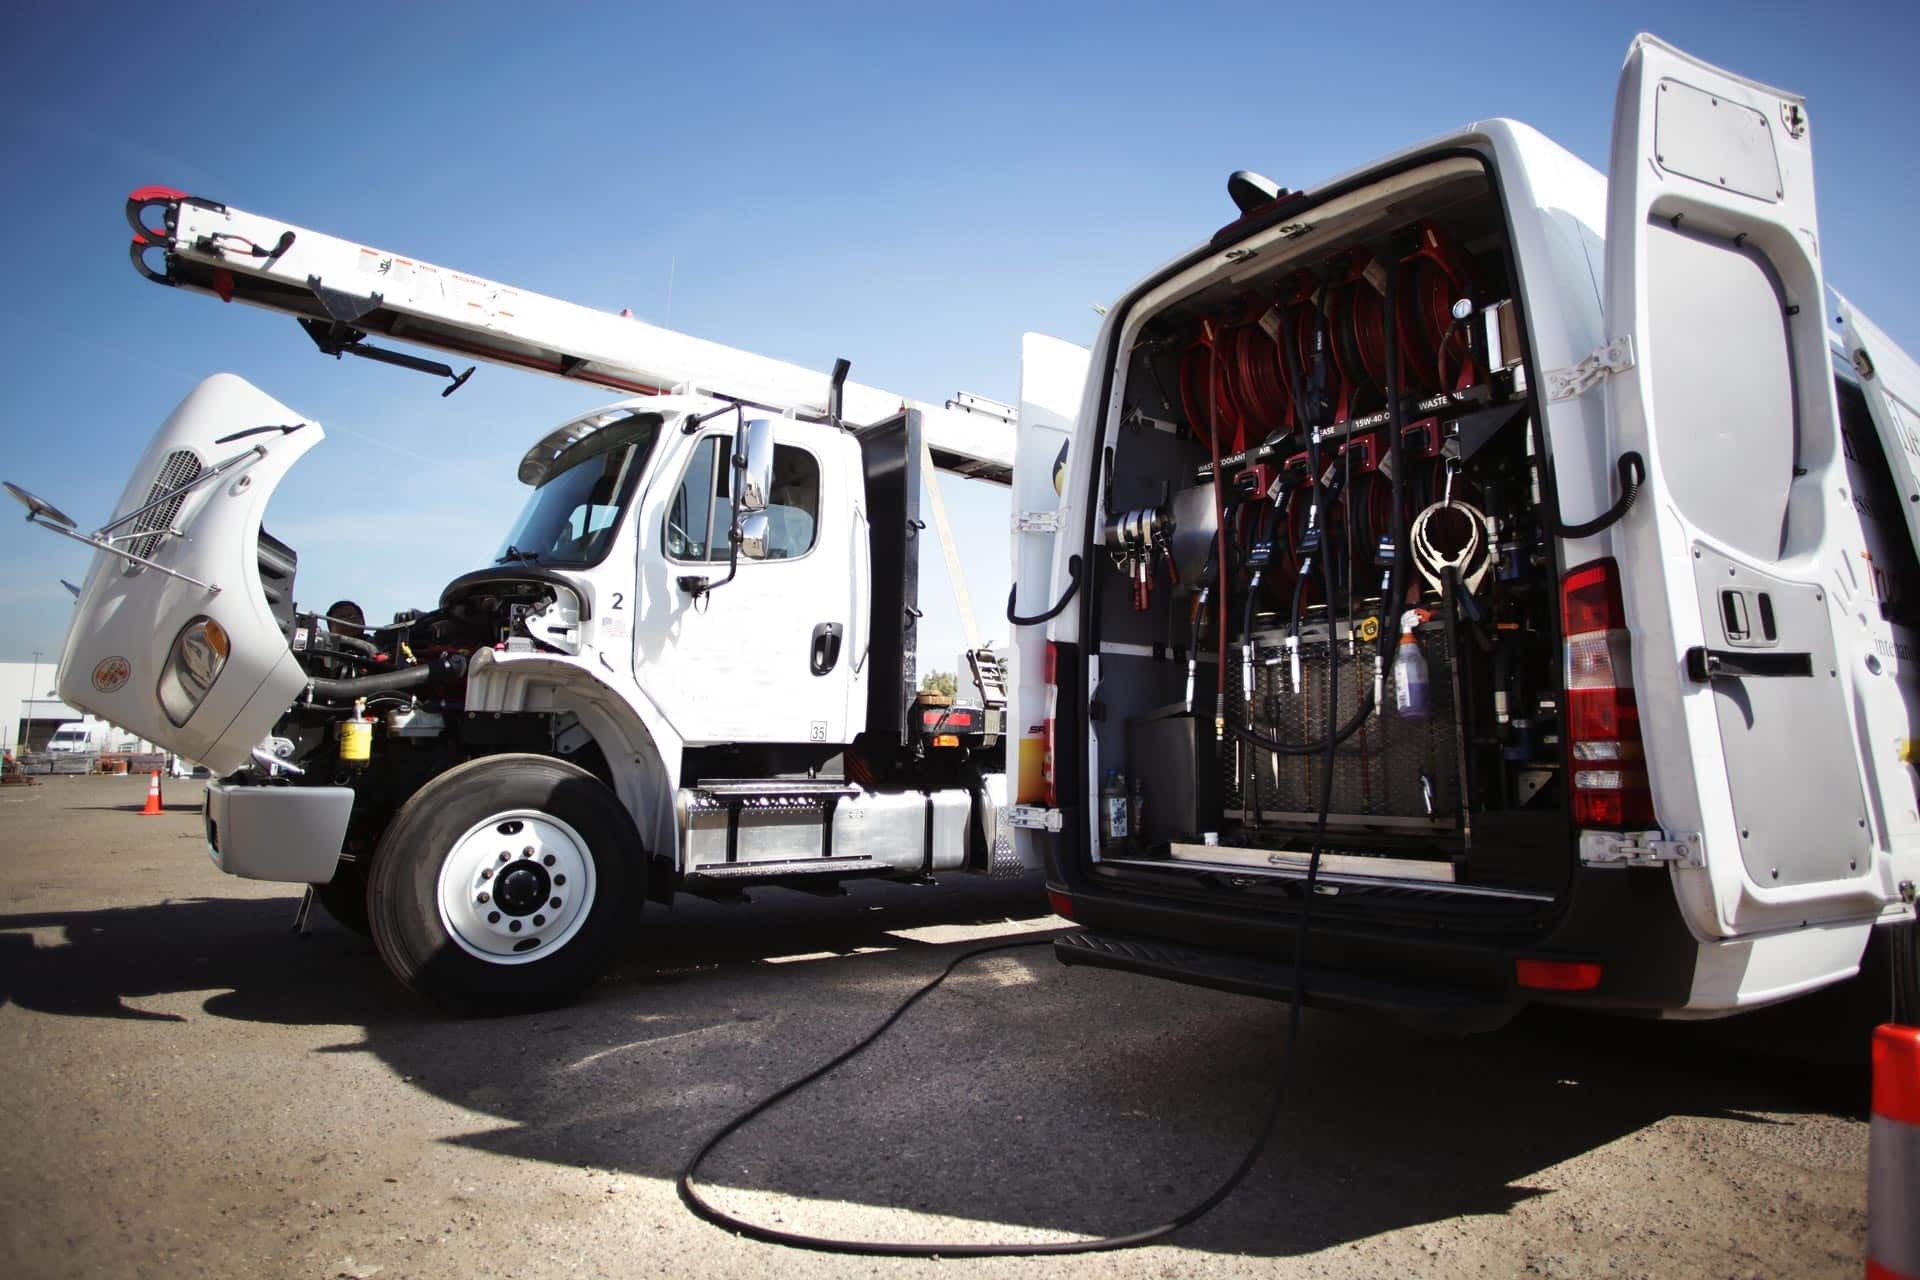 5 Tips to Grow Your Mobile Truck Repair Business